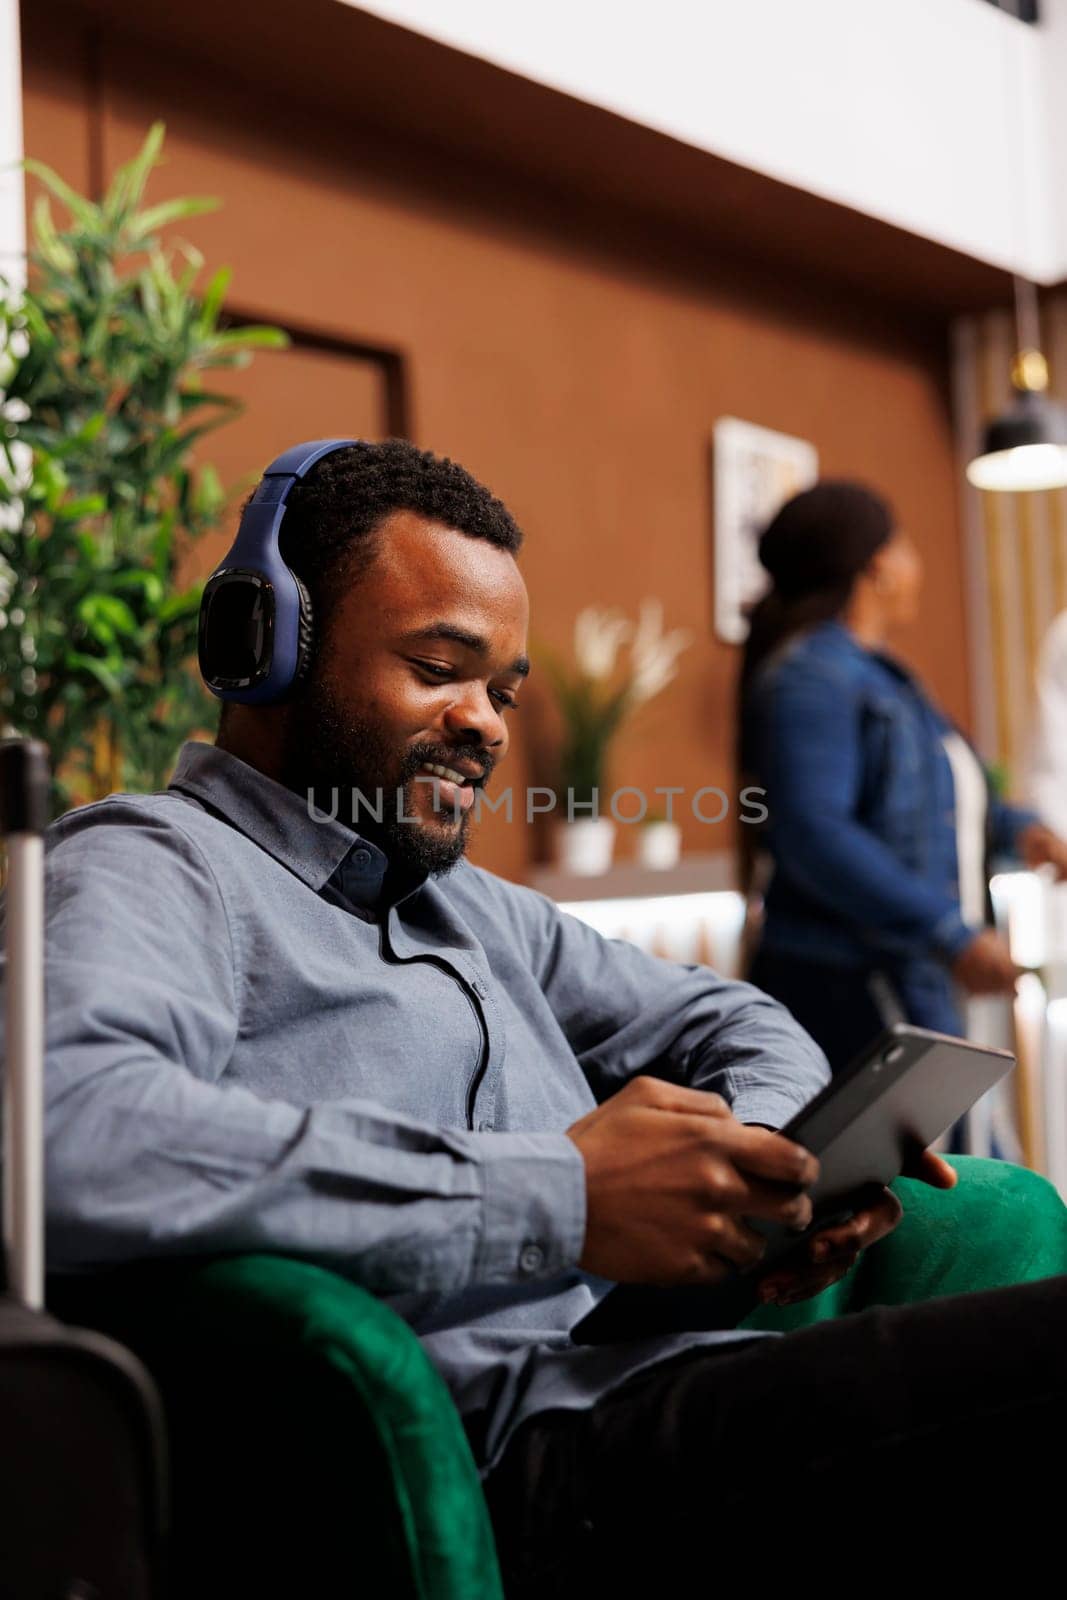 Smiling African American man businessman in headphones using digital tablet checking email during business trip, black guy hotel guest browsing internet while waiting for check-in in lobby